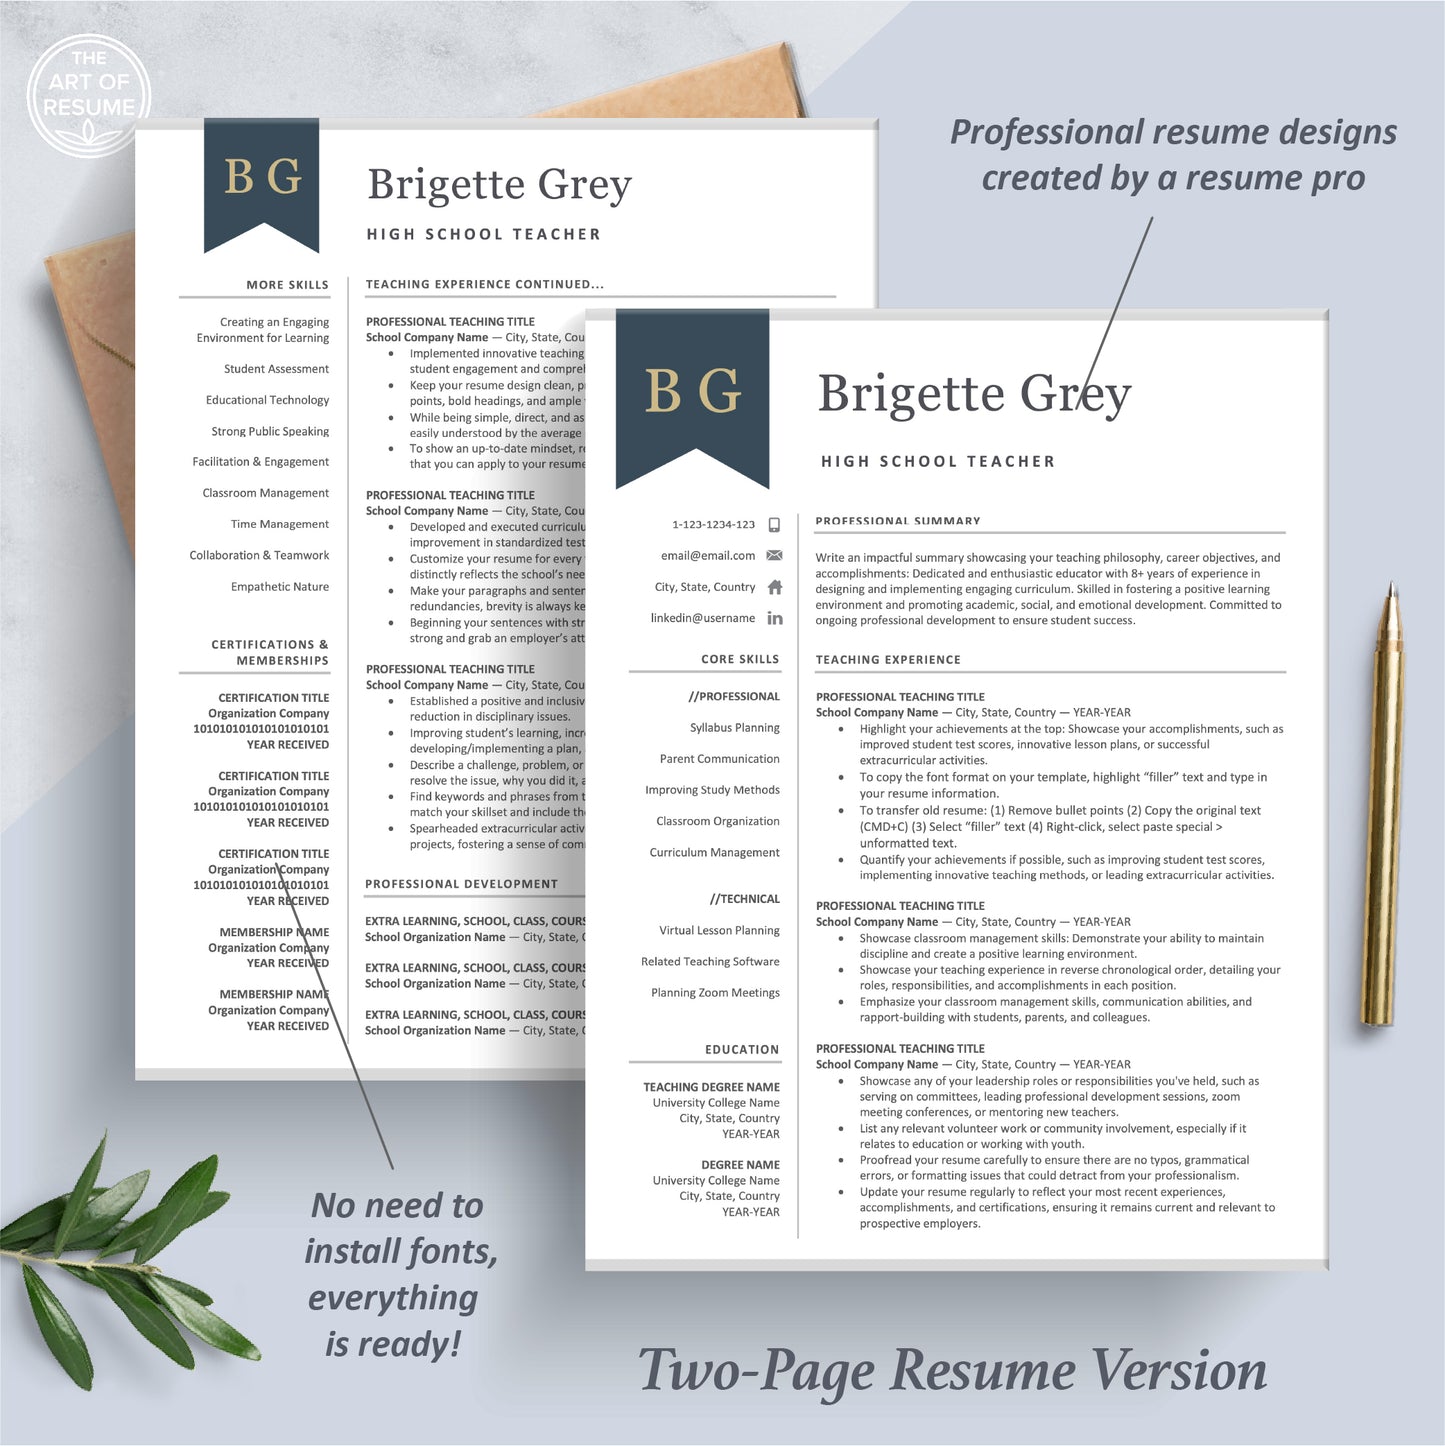 The Art of Resume Professional Navy Blue Teacher Resume Template Bundle | 2 Page Teaching Resume Format